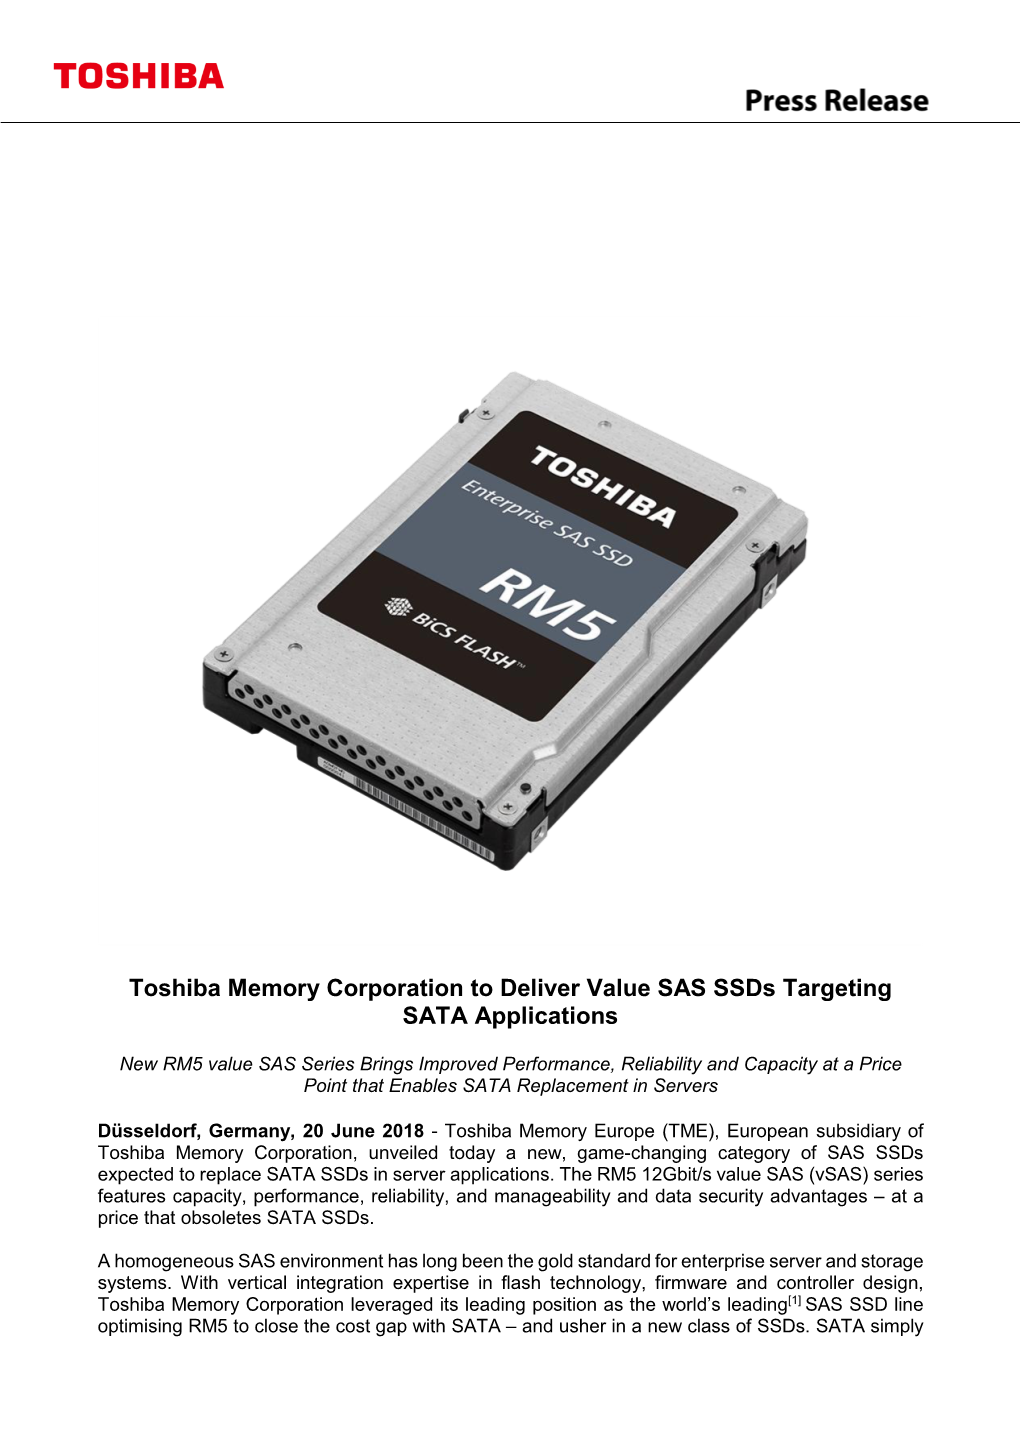 Toshiba Memory Corporation to Deliver Value SAS Ssds Targeting SATA Applications